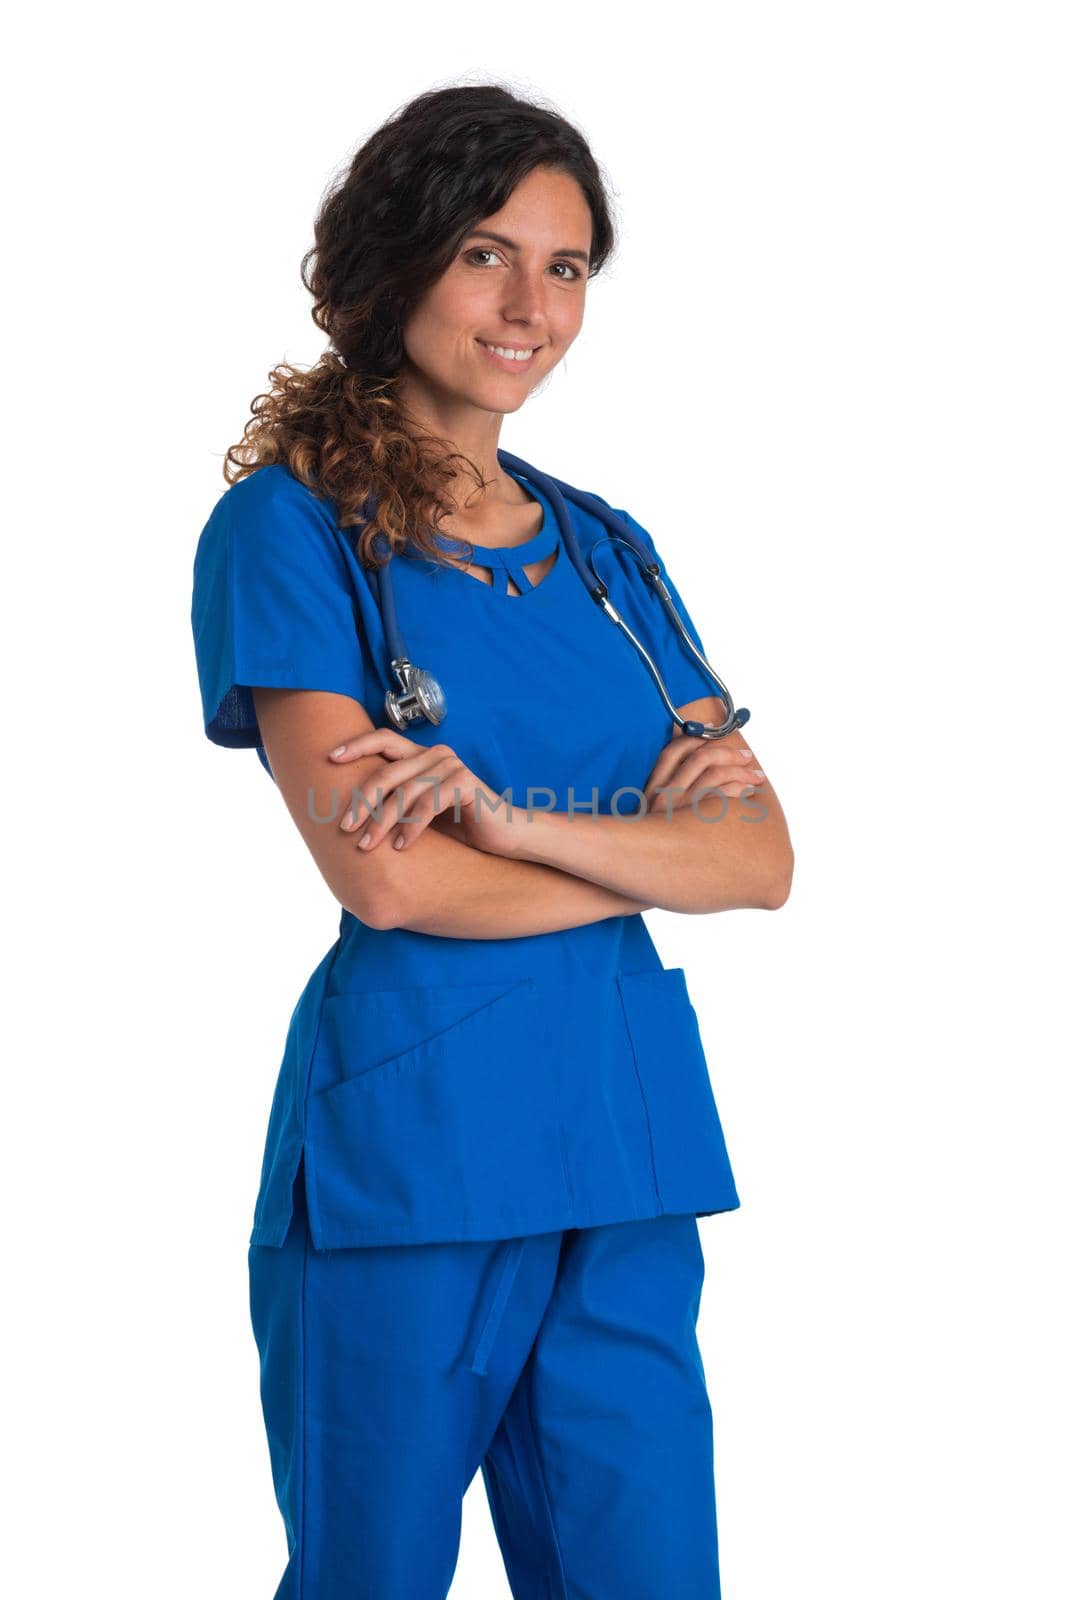 Female nurse in blue uniform with stethoscope standing with arms crossed isolated on white background